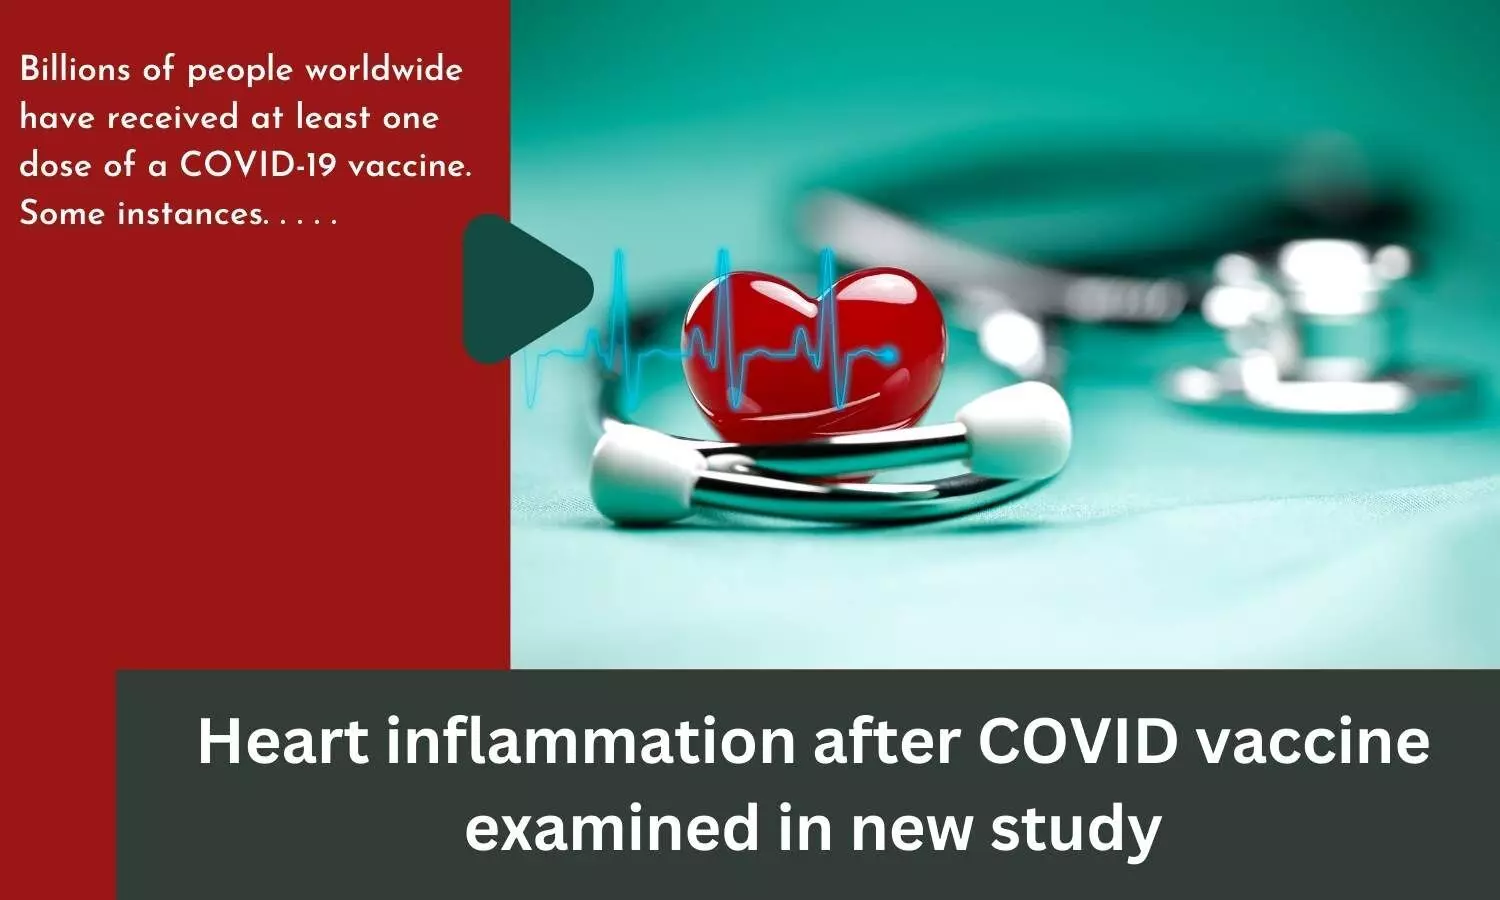 Heart inflammation after COVID vaccine examined in new study